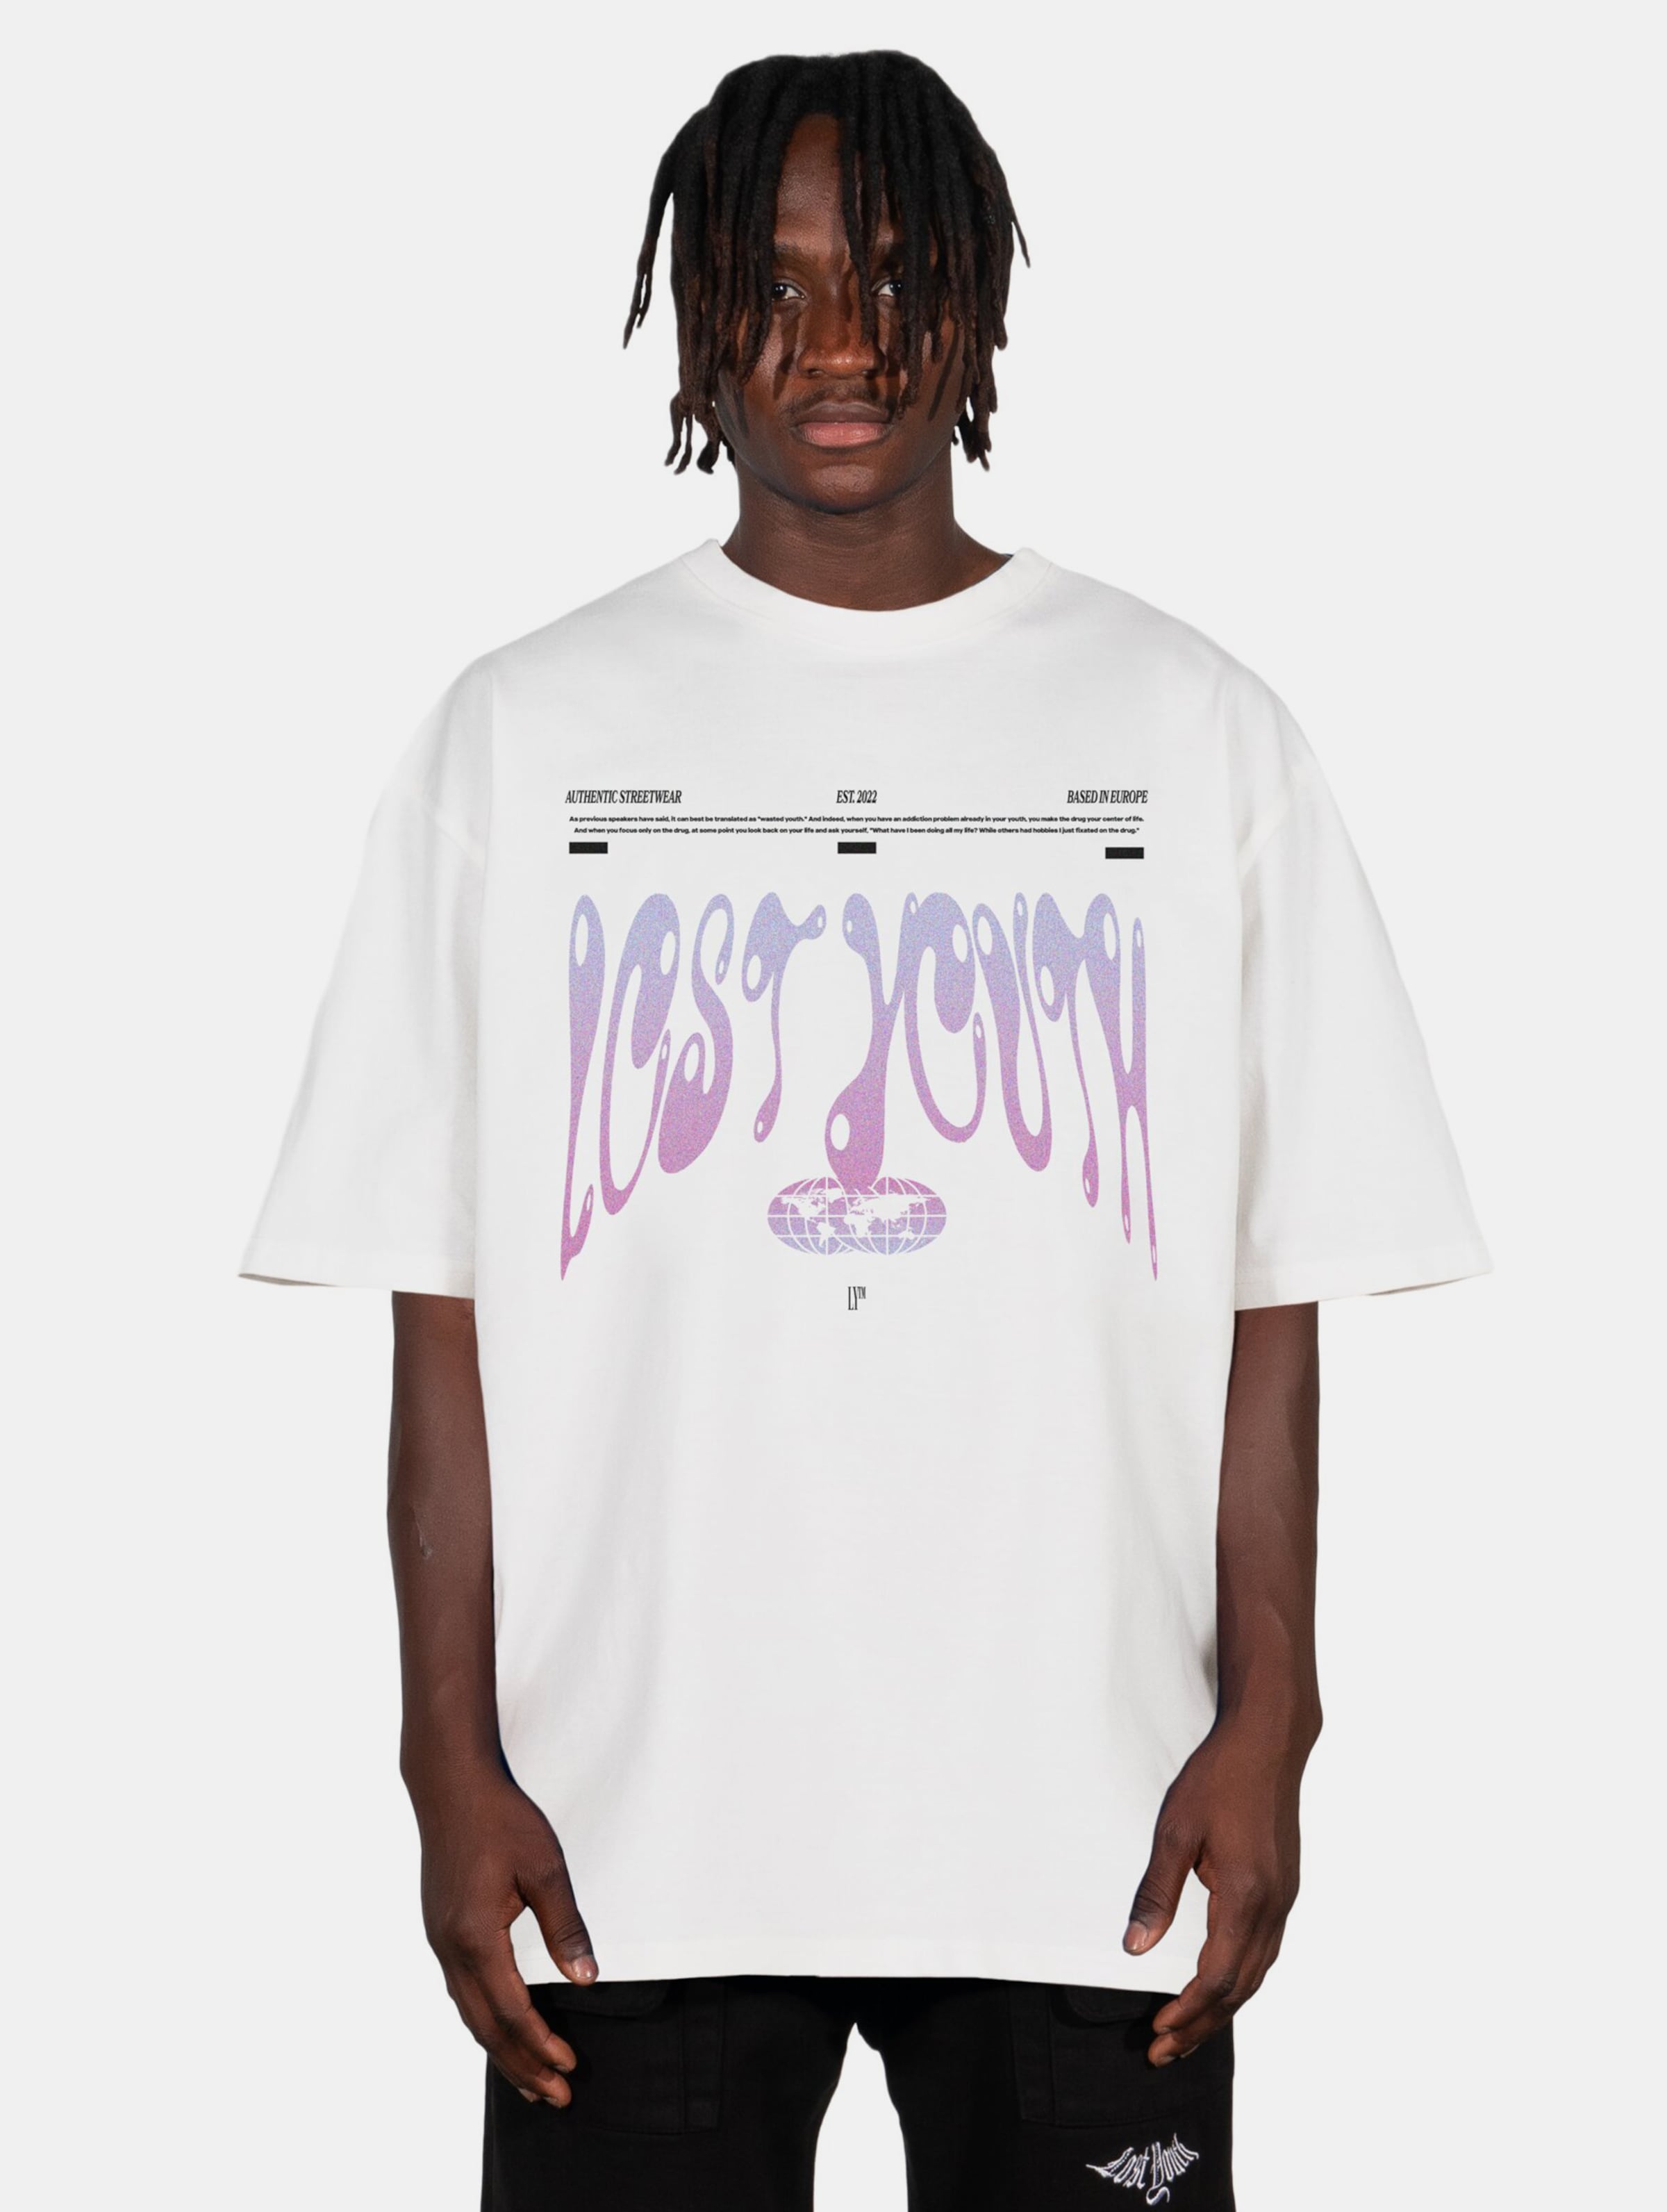 Lost Youth LY TEE- AUTHENTIC Männer,Unisex op kleur wit, Maat S